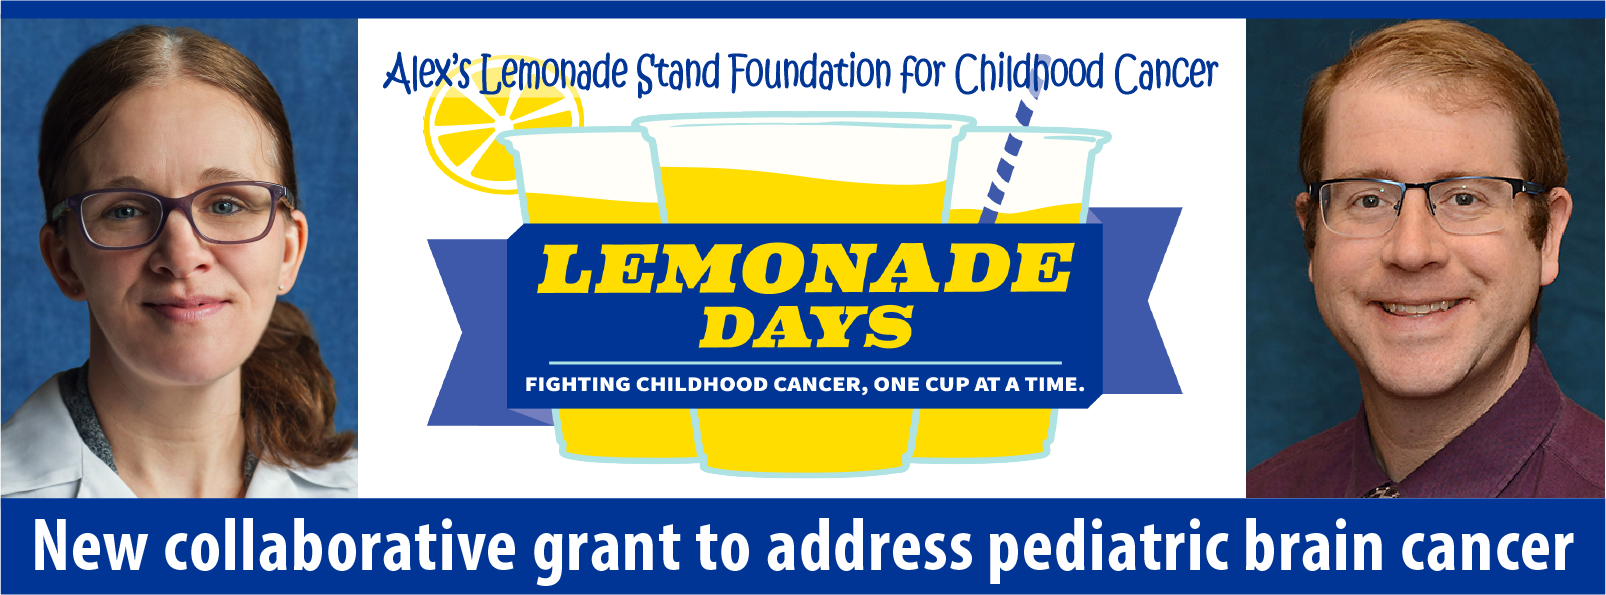 Grant from Alex's Lemonade Stand Foundation